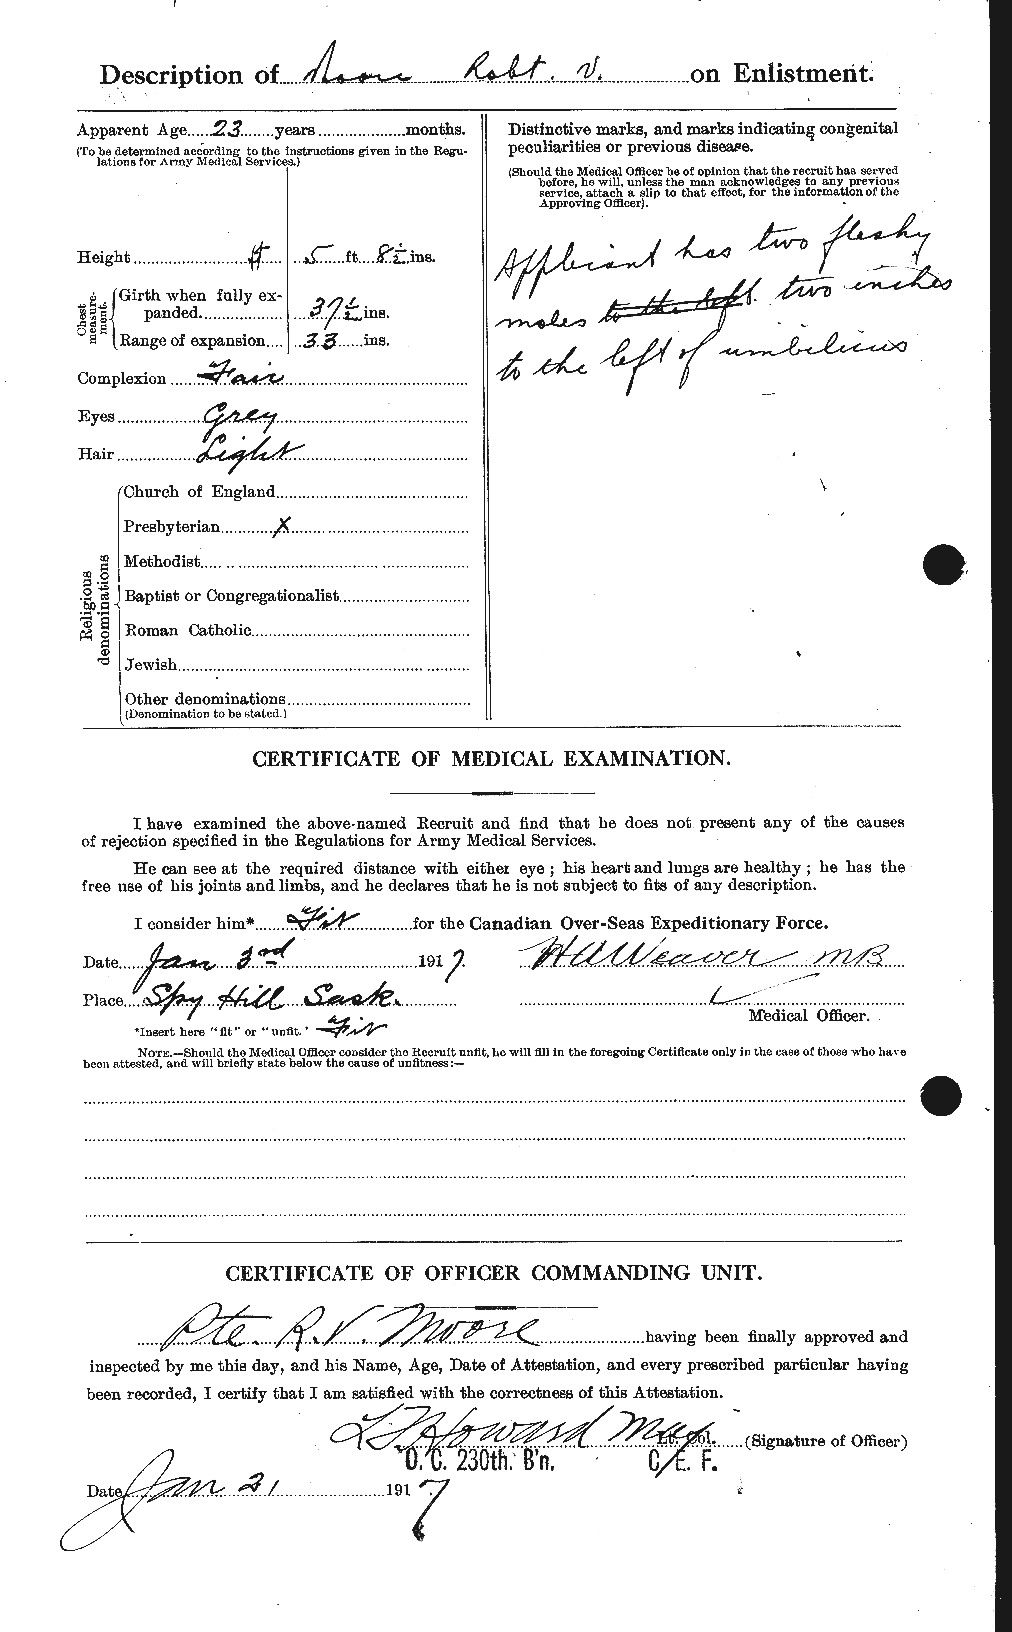 Personnel Records of the First World War - CEF 503584b